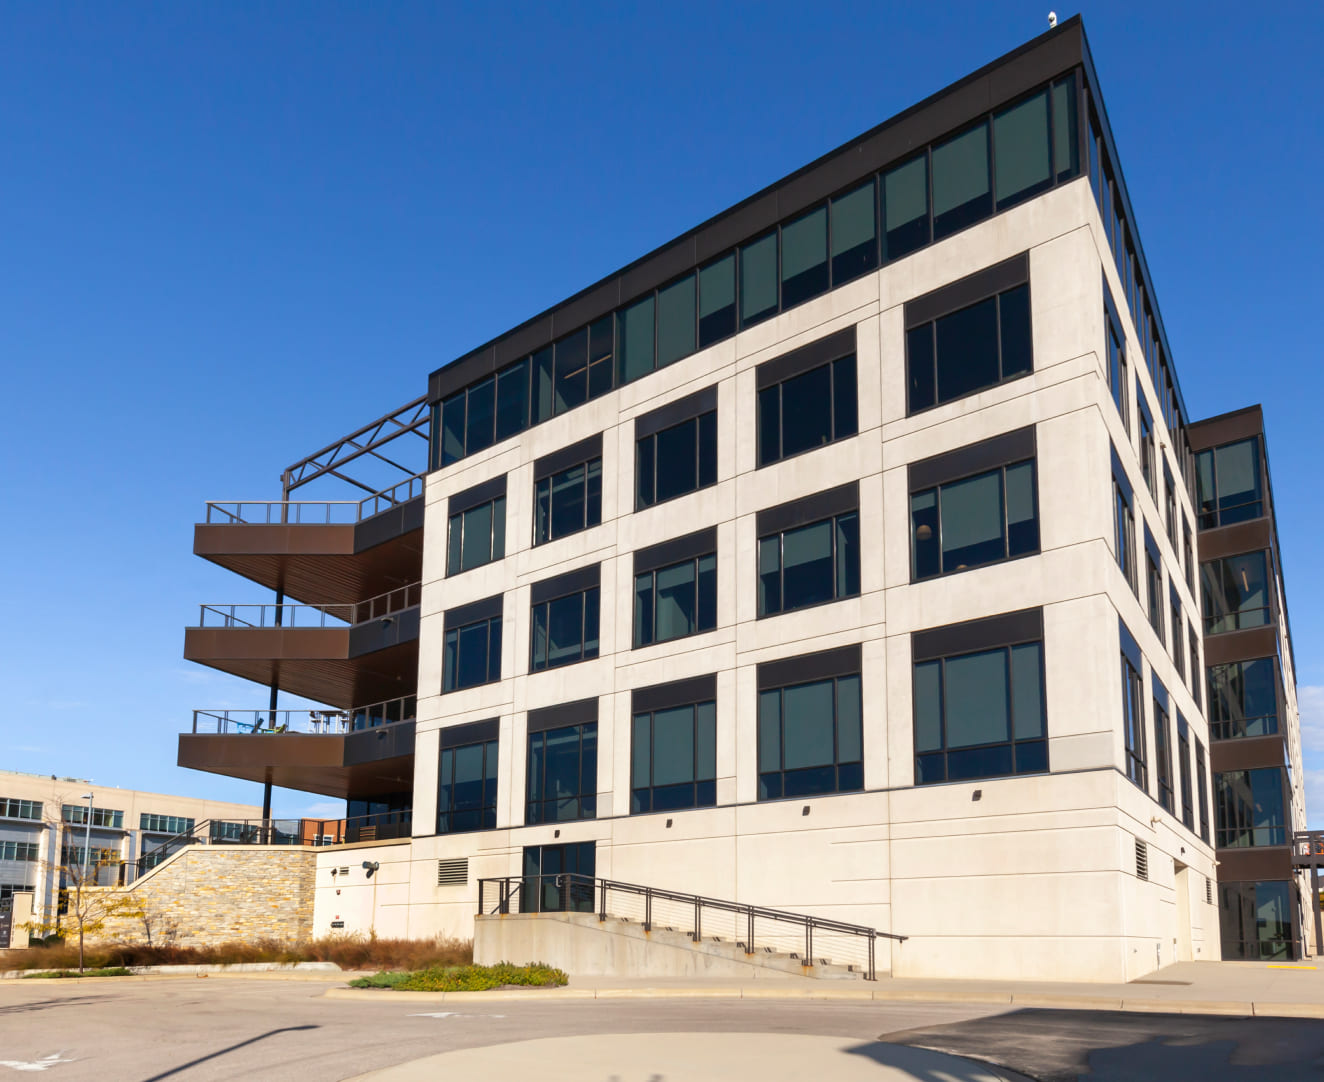 The exterior and balconies of the office building at 2323 Crossroads Drive in Madison, WI.